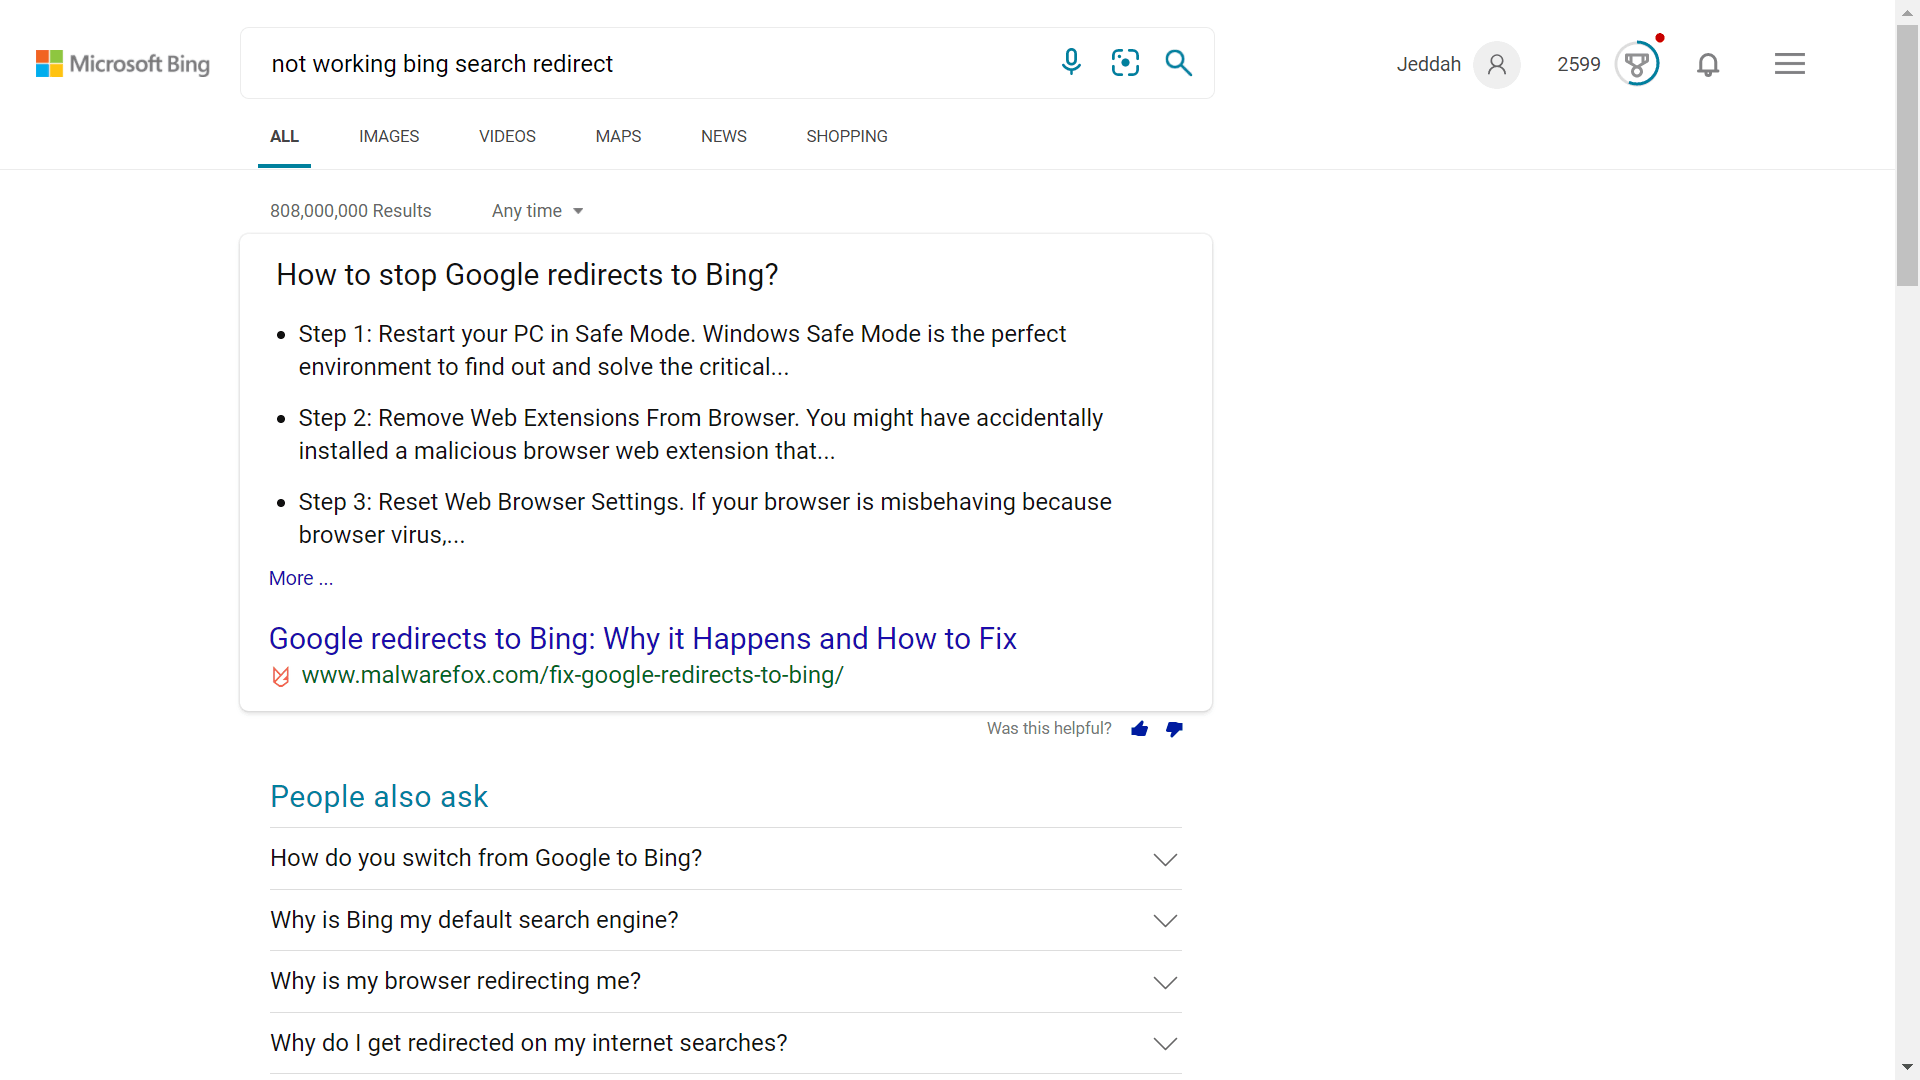 Searching YouTube from Microsoft Bing redirects me to a Bing search